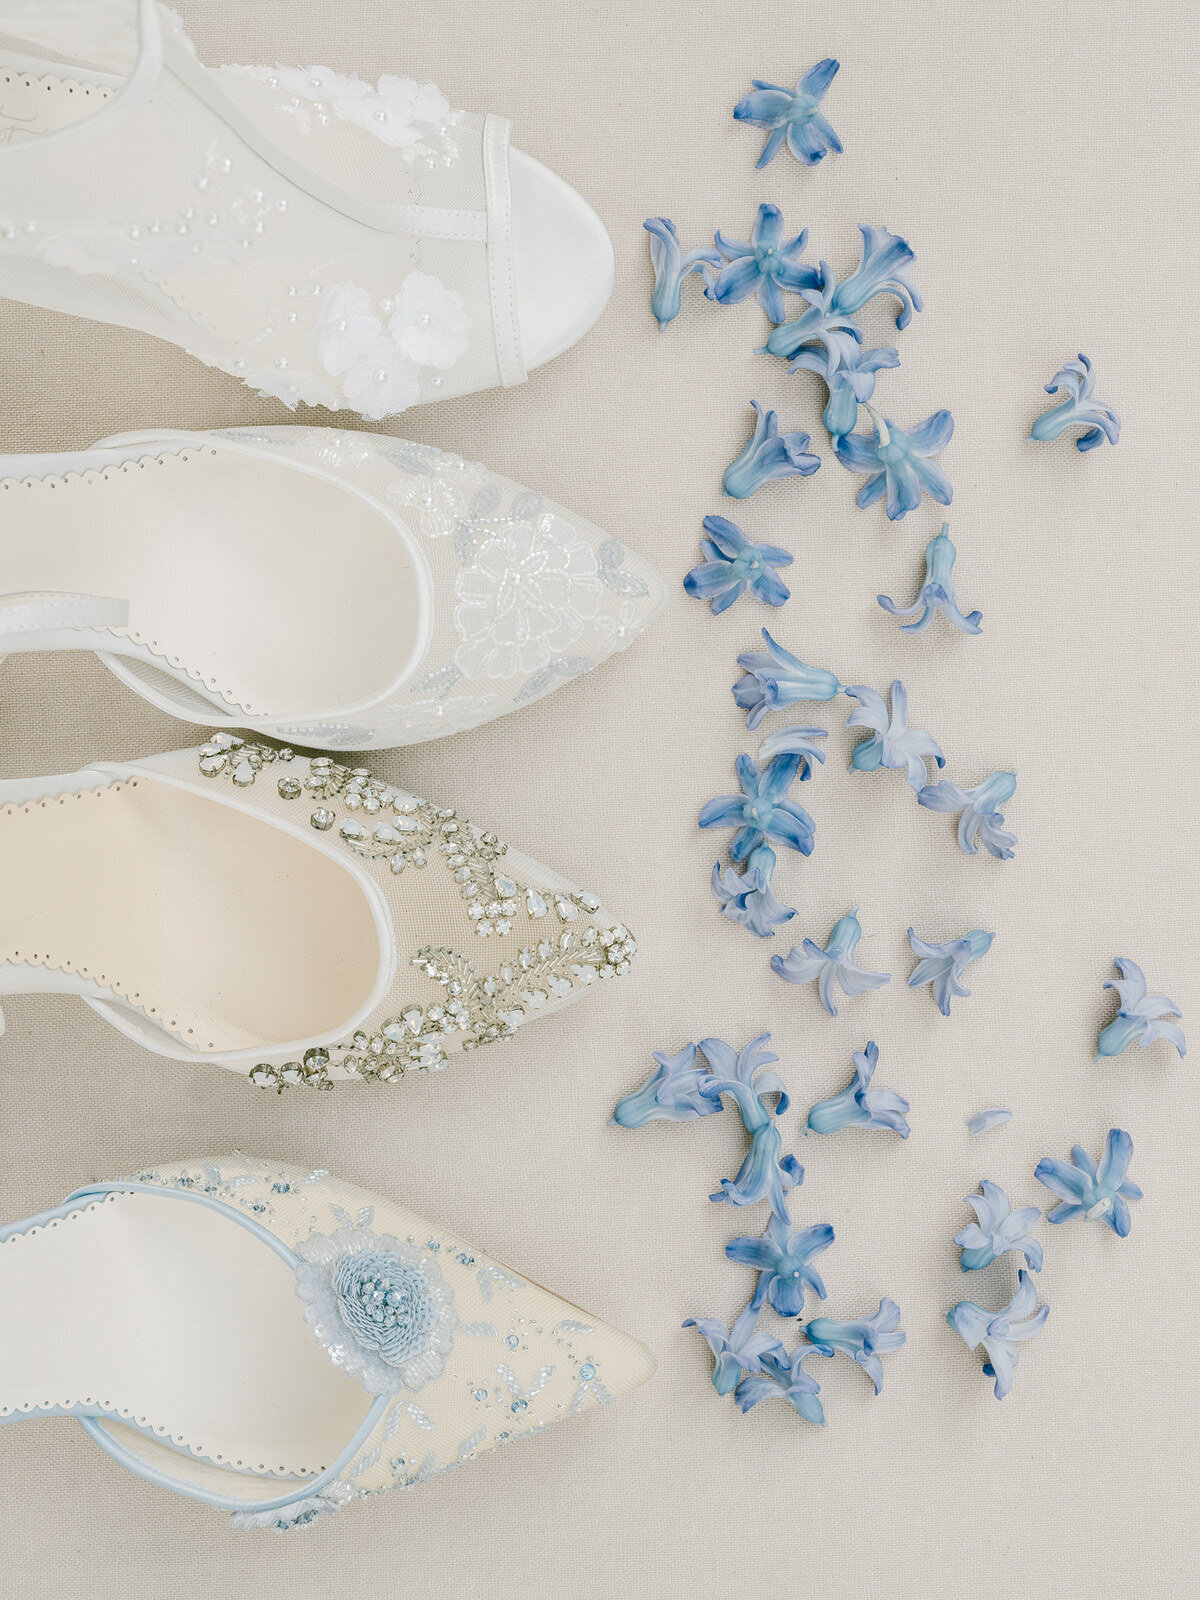 Bella Belle Shoes - Serenity Photography -19